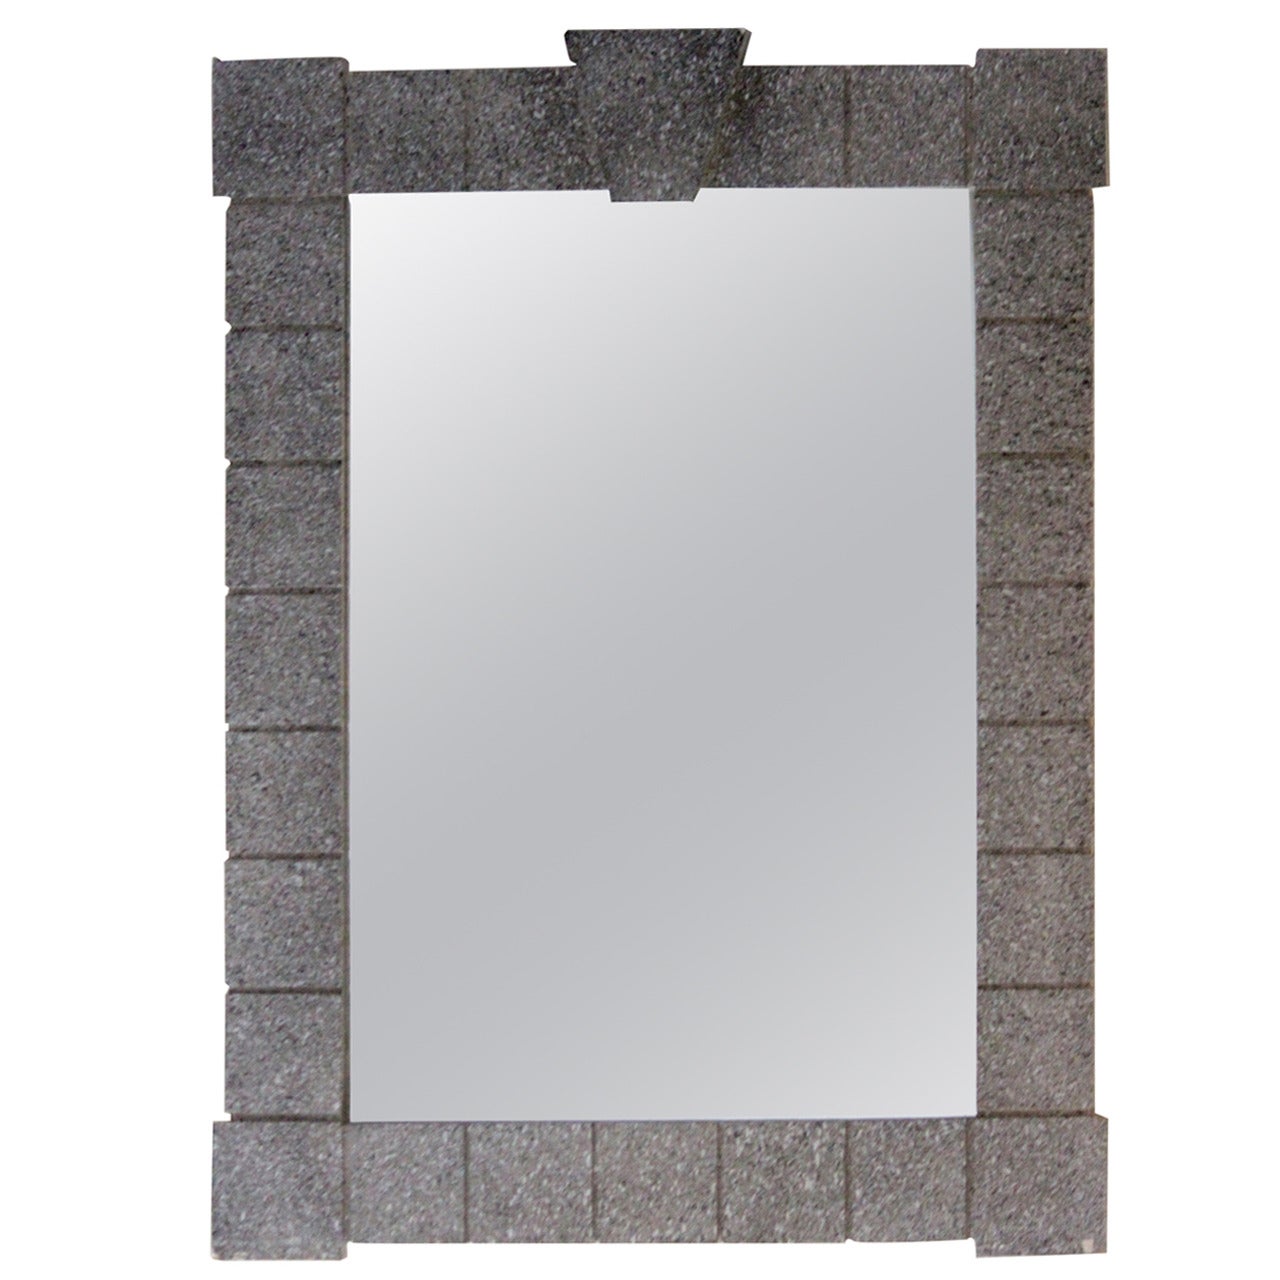 1970s Mirror Architectural Delineated Faux Stone For Sale